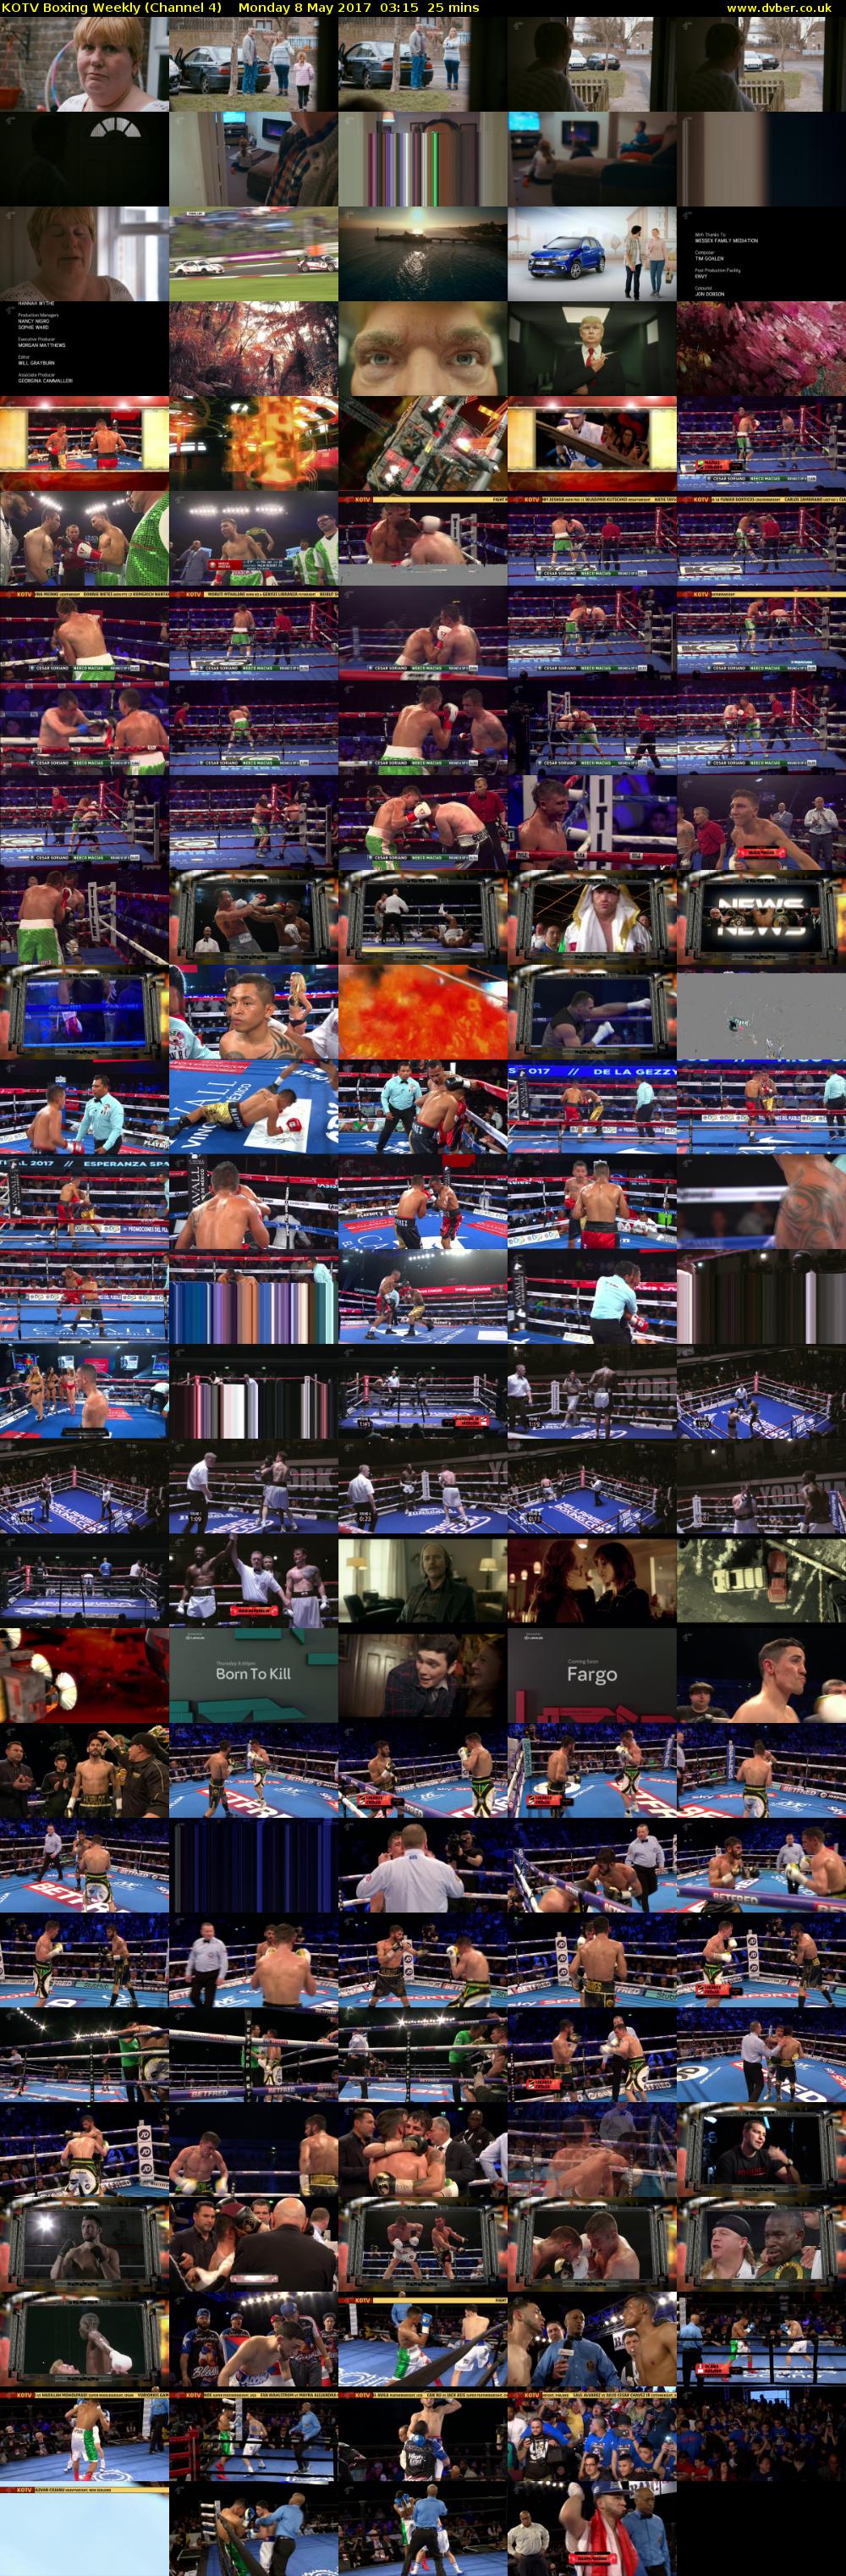 KOTV Boxing Weekly (Channel 4) Monday 8 May 2017 03:15 - 03:40